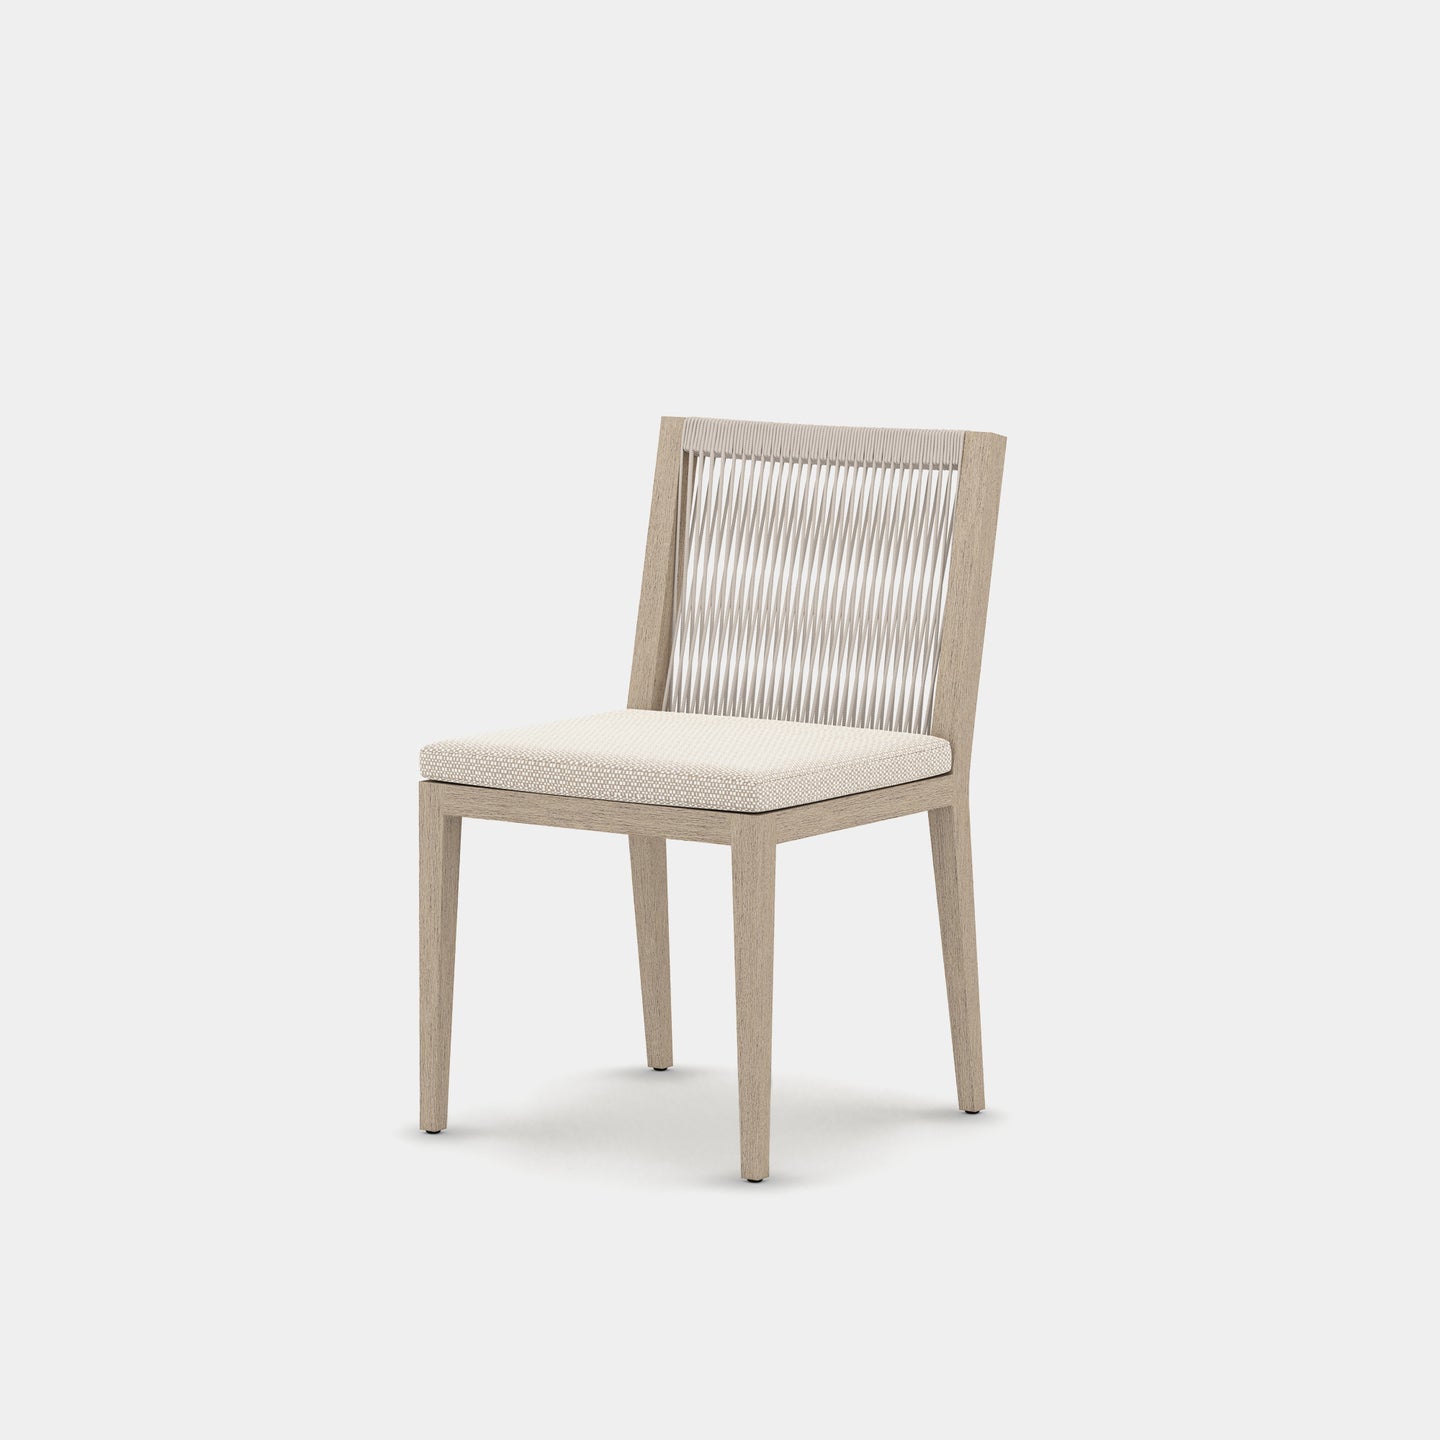 Maia Outdoor Dining Chair